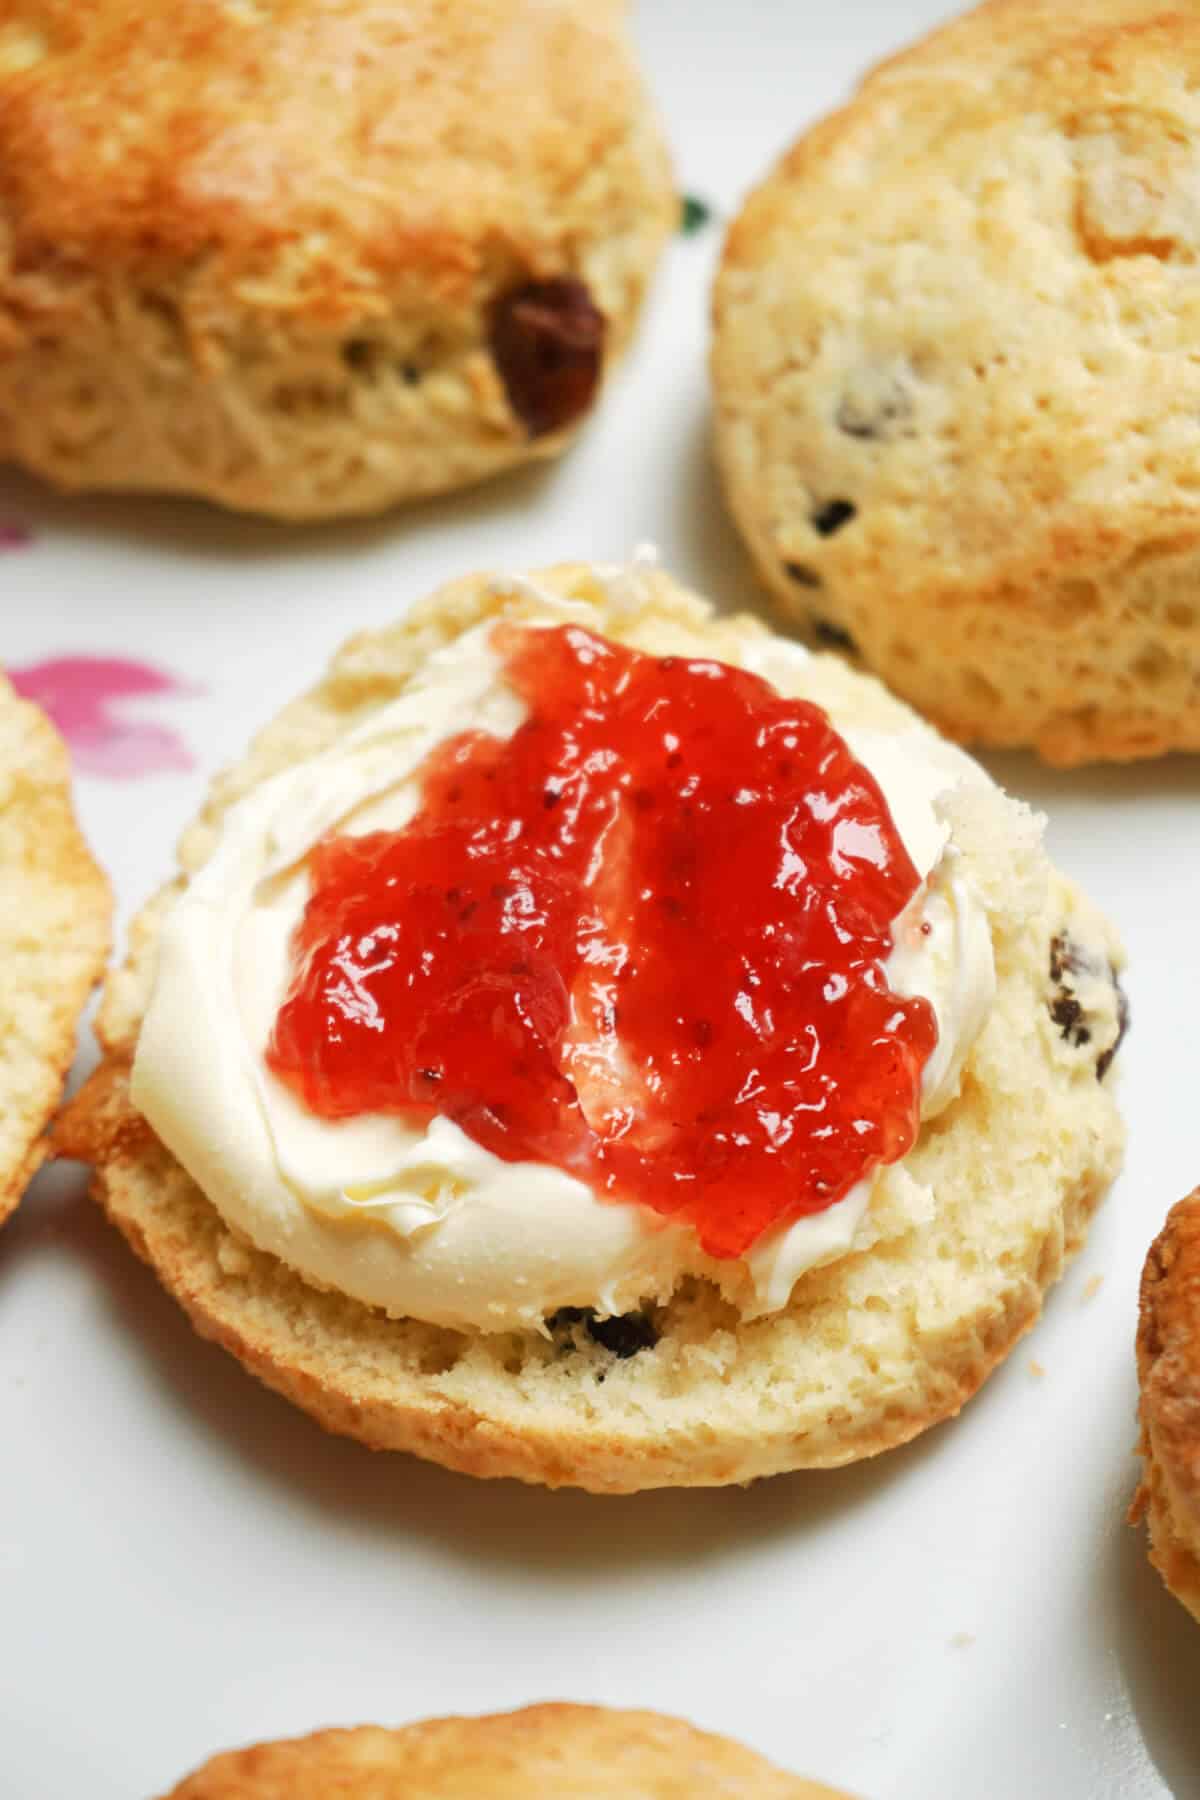 Half a scone topped with cream and jam.